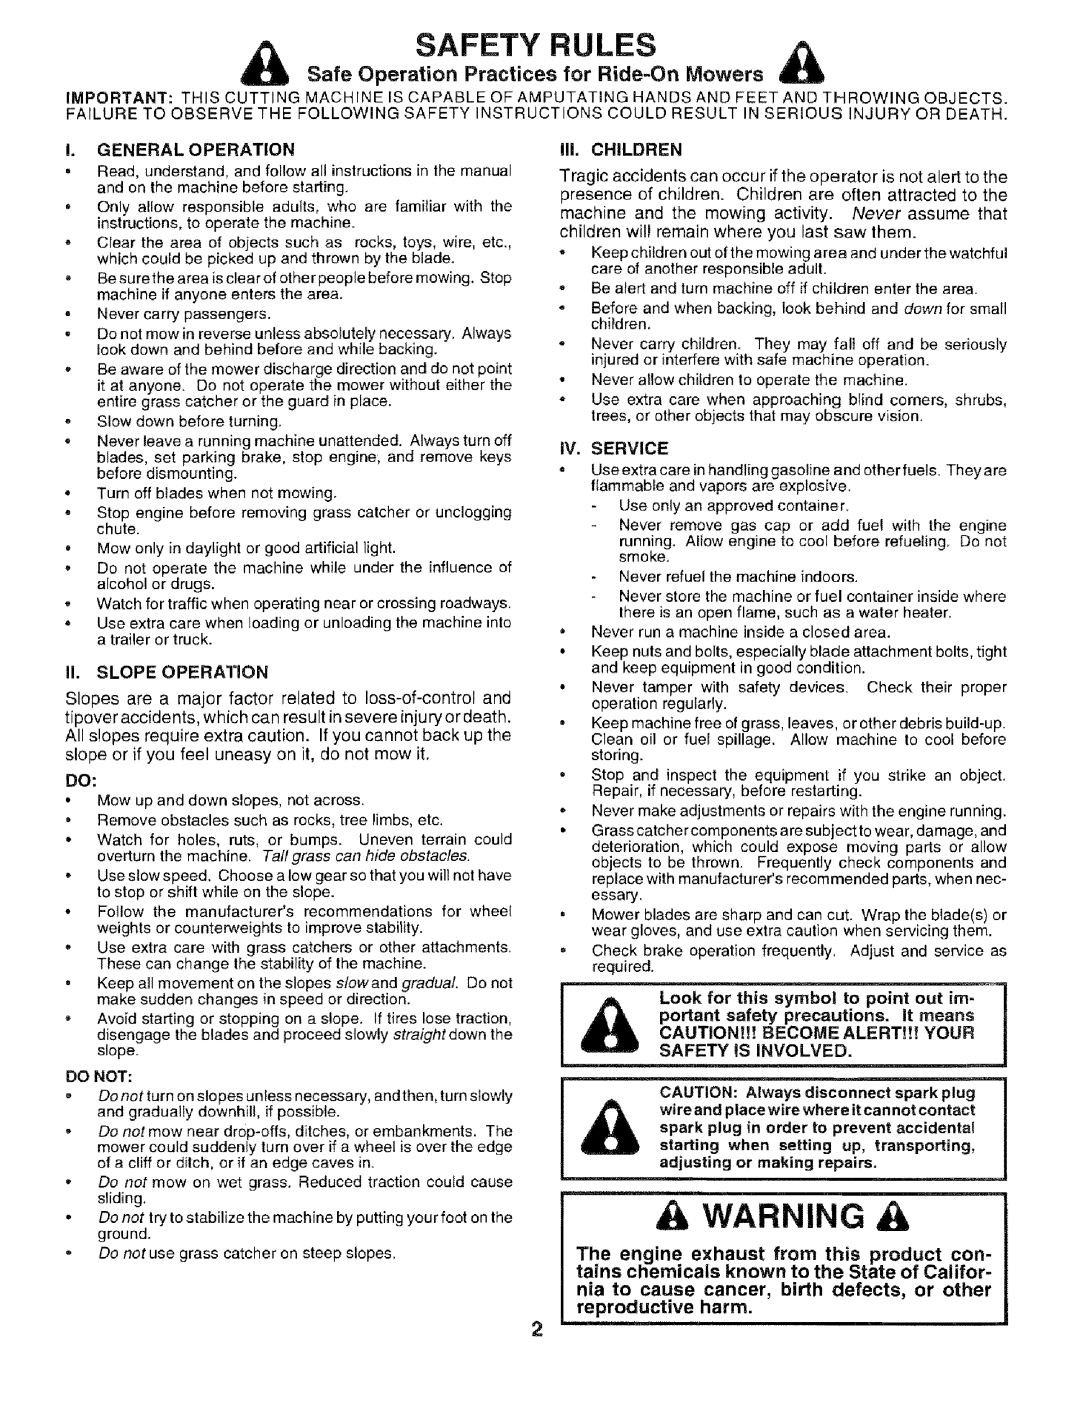 Sears 917.25051 A Warning A, Safety Rules, Safe Operation Practices for Ride-OnMowers, Iii.Children, The engine, harm 